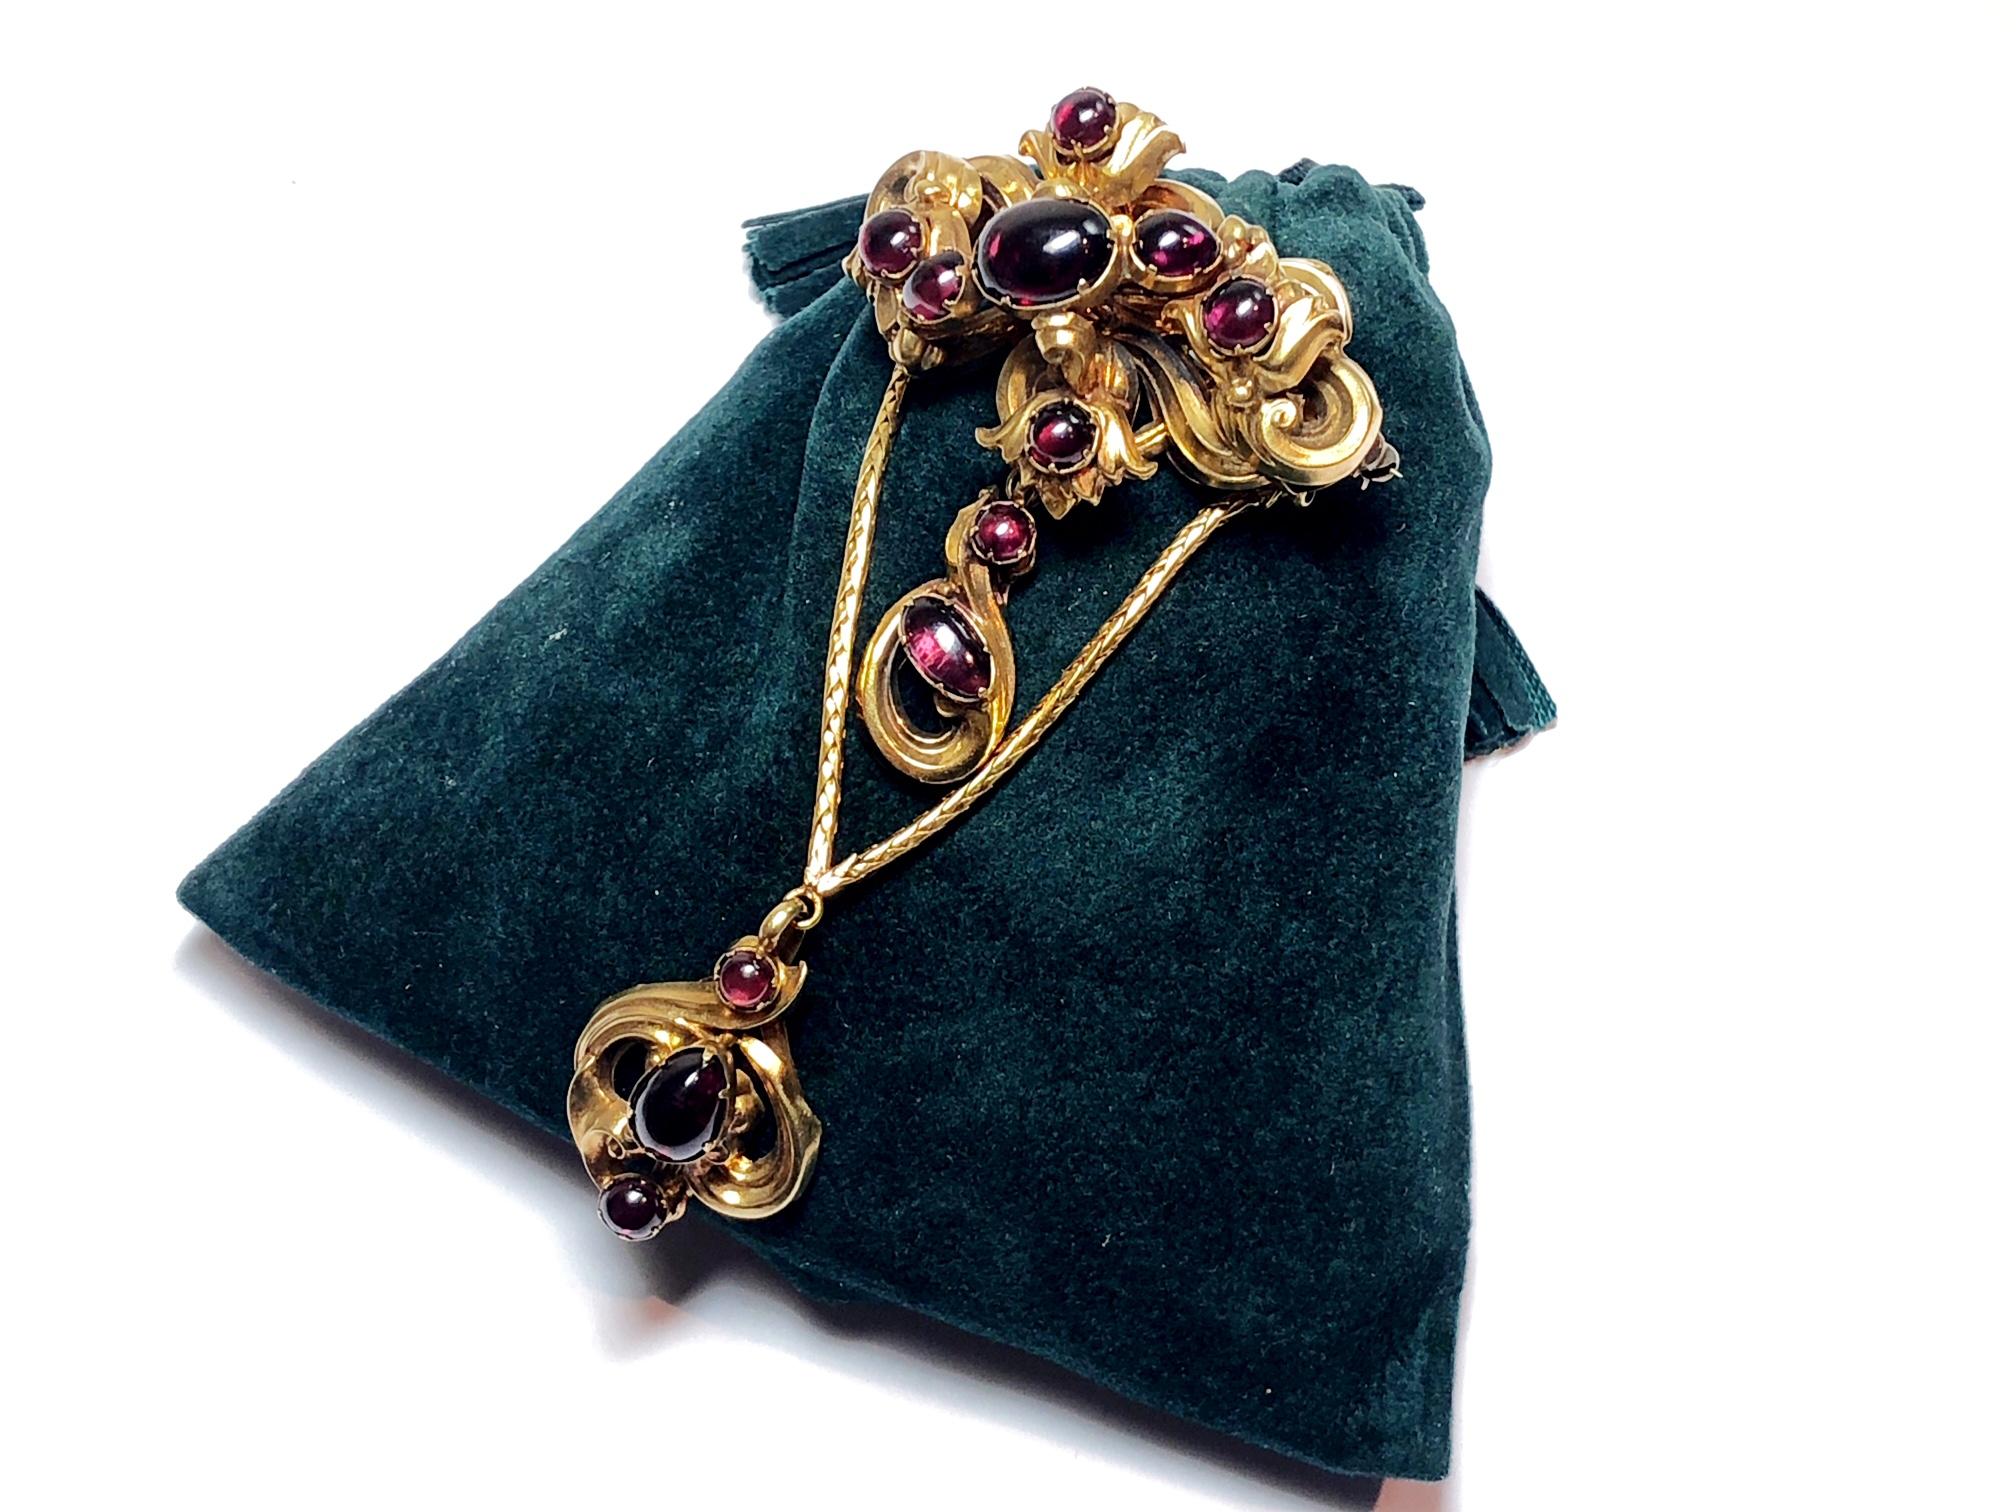 A Victorian garnet brooch, set with cabochon cut garnets set in a floral motif, suspending another cabochon garnet drop, with a further cabochon garnet drop suspended from two gold rope chains, circa 1875